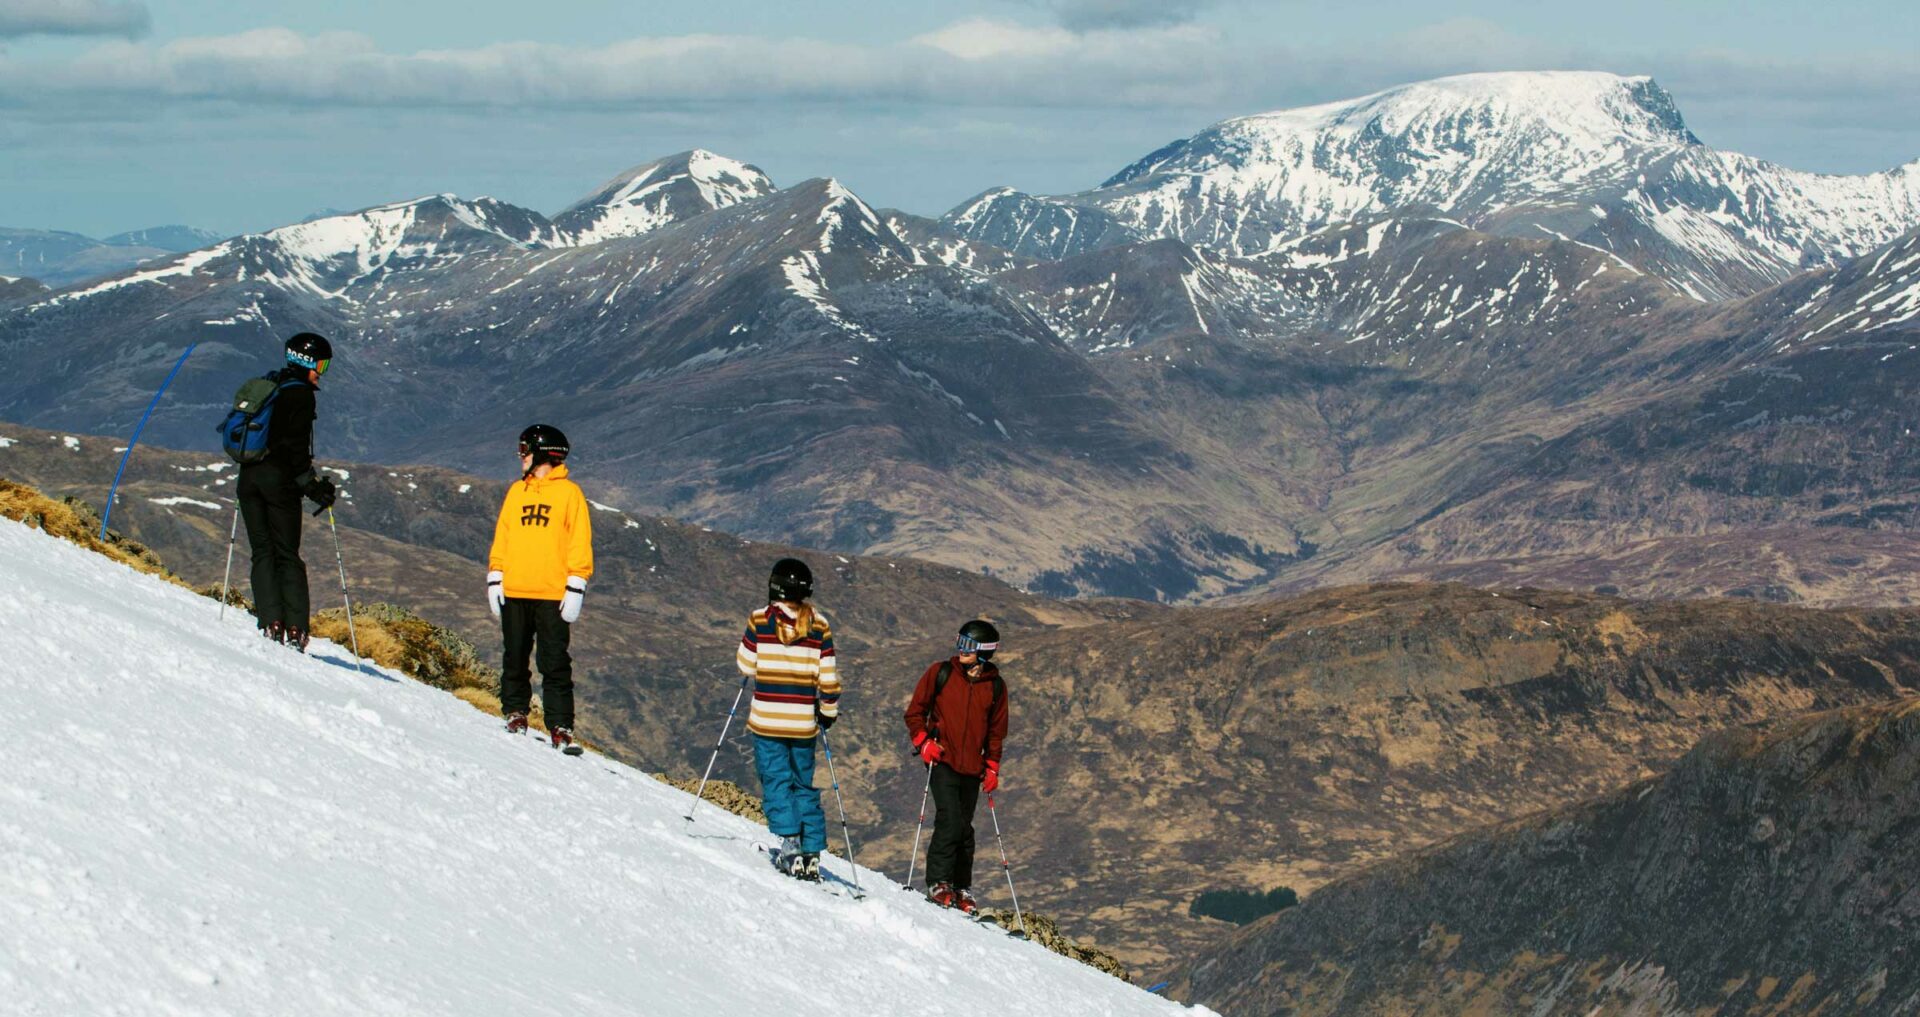 Four young people wearing ski wear are standing on snow covered Glencoe Mountain